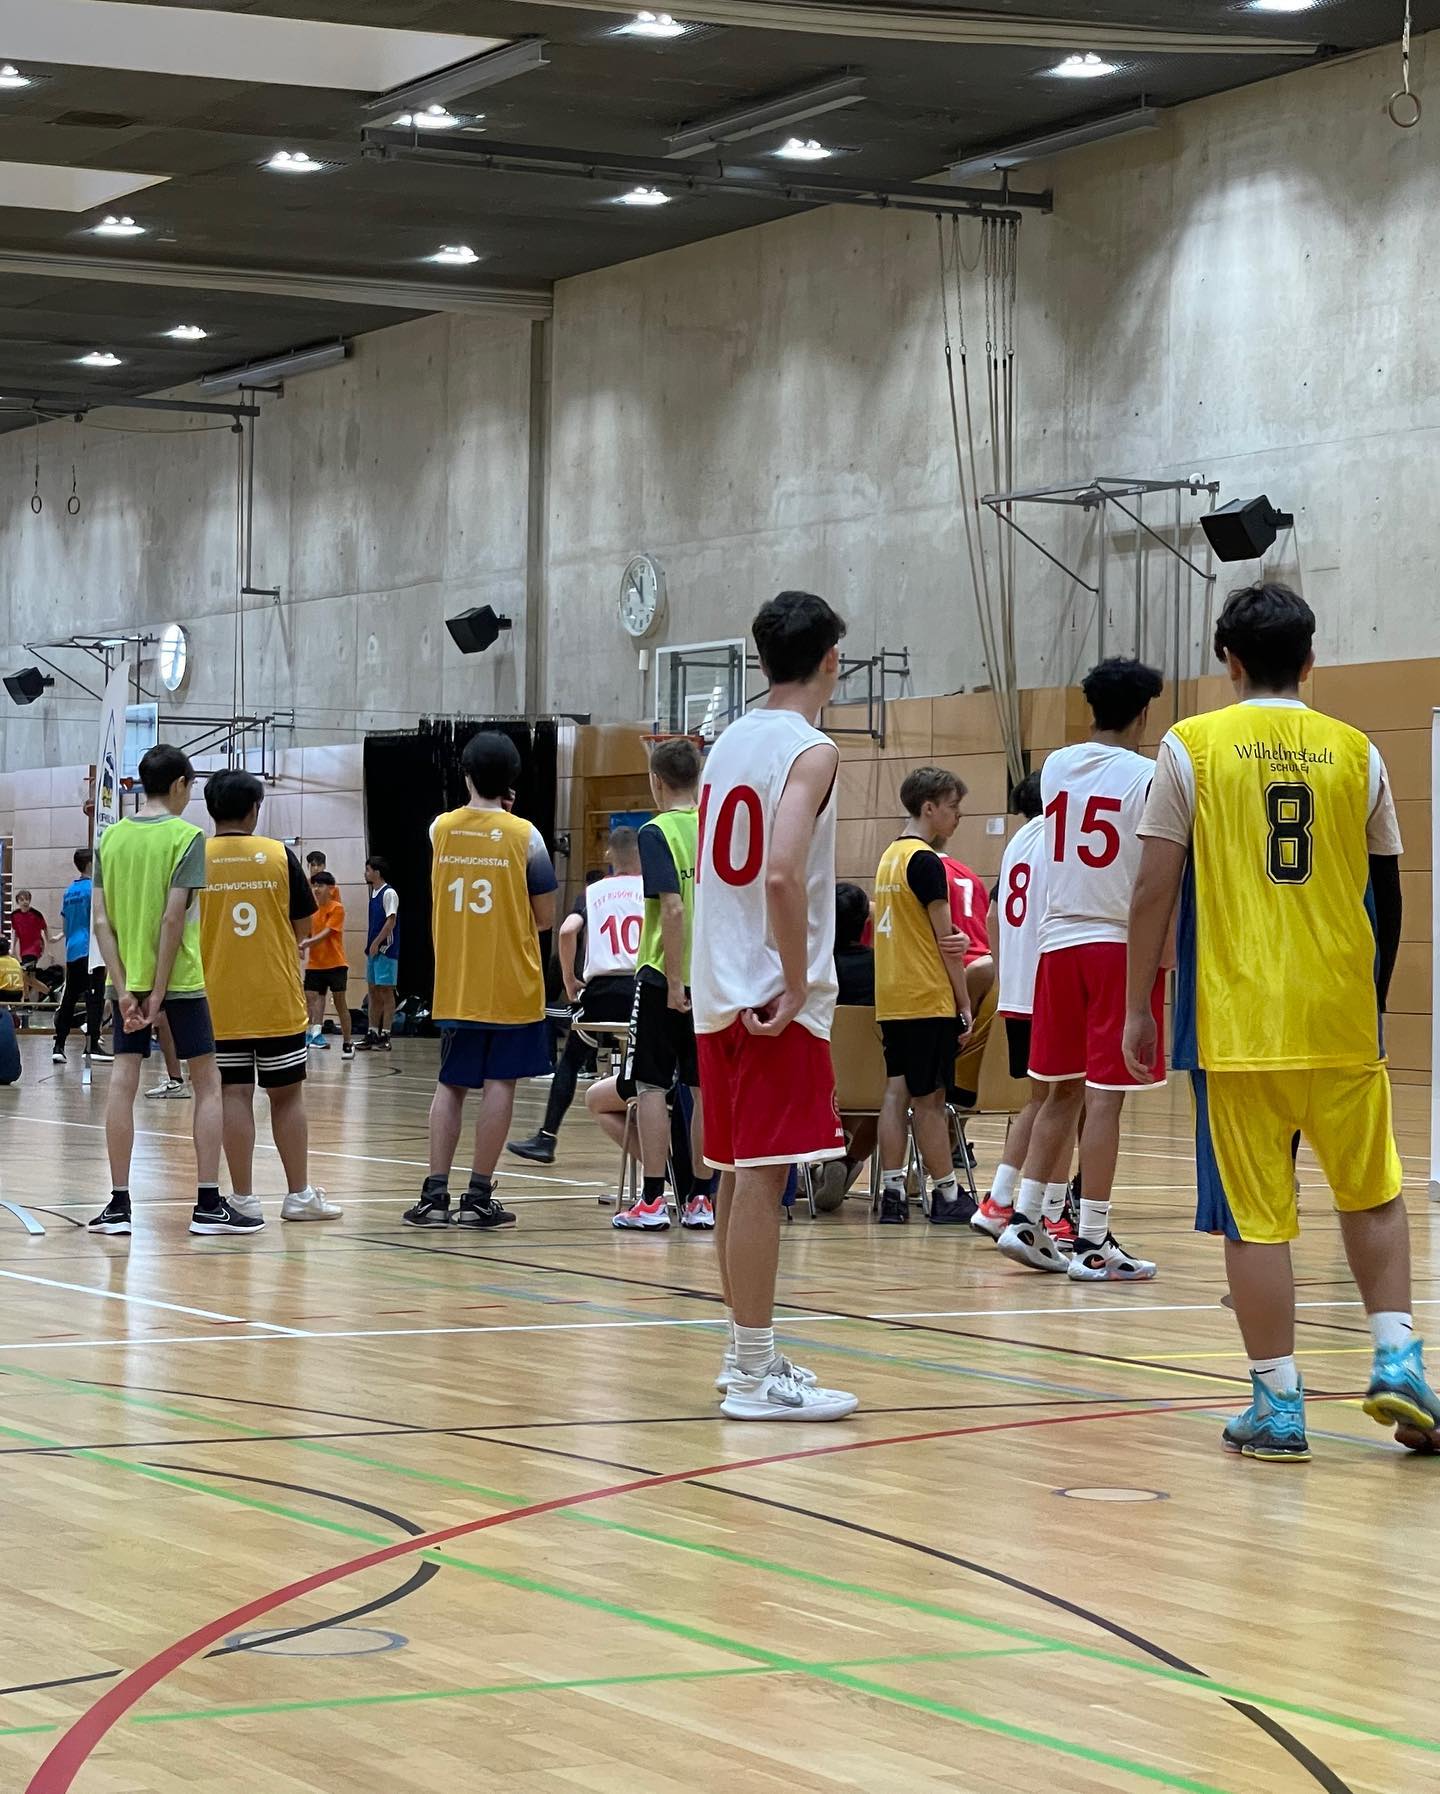 Students dressed for basketball in a sports hall